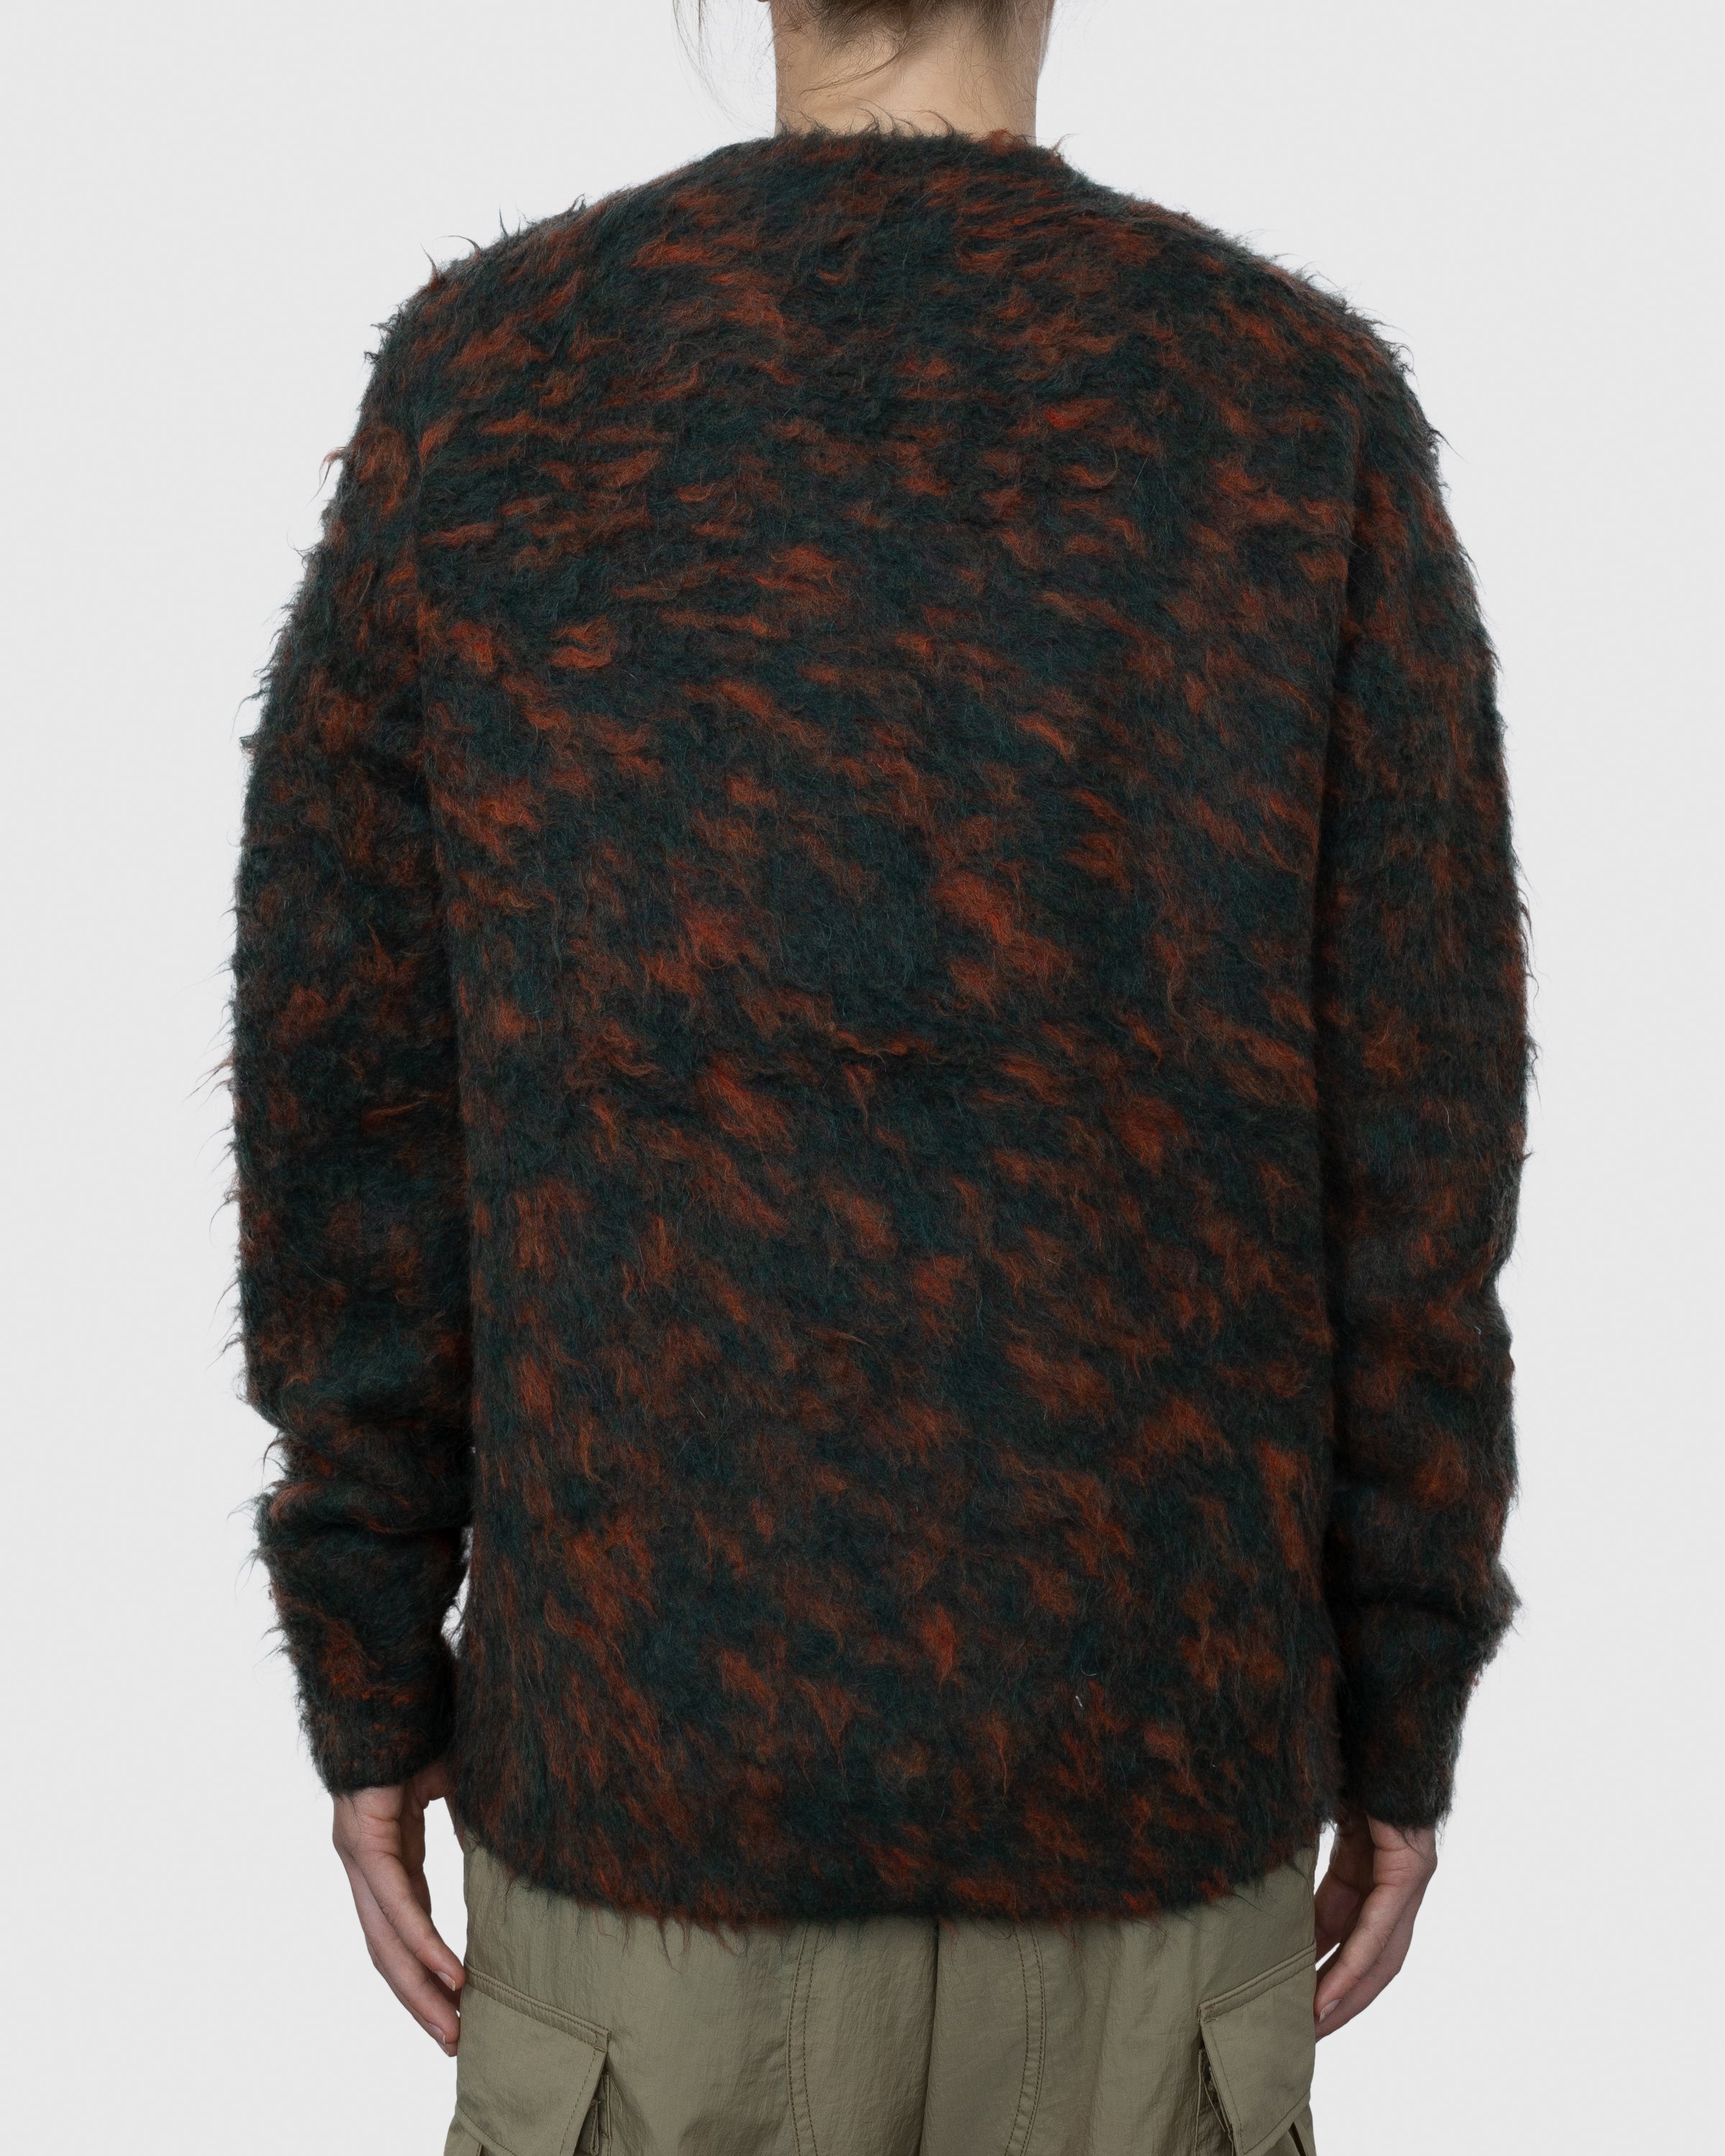 Acne Studios - Hairy Crewneck Sweater Green - Clothing - Green - Image 3